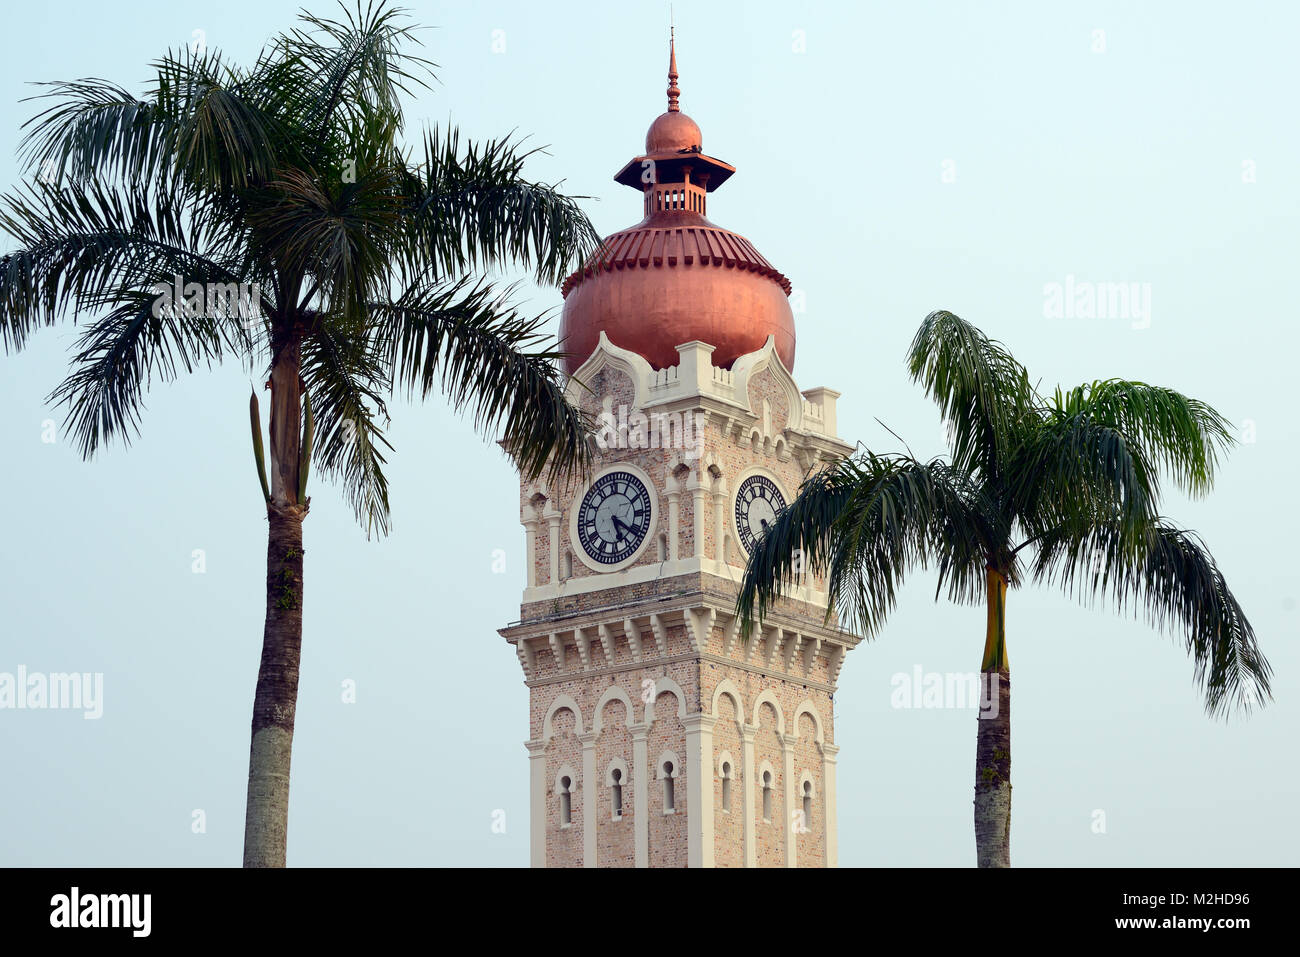 Kuala Lumpur, Malaysia - November 2, 2014: The clock on the 40-meter-high tower of the Palace of the Sultan Abdul Samad closeup Stock Photo